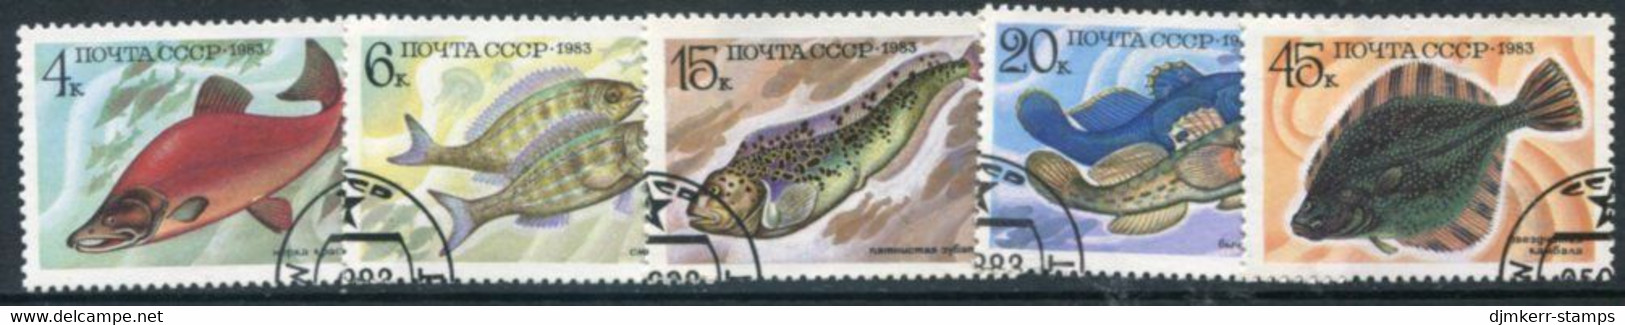 SOVIET UNION 1983 Edible Fish Used.  Michel 5294-98 - Used Stamps